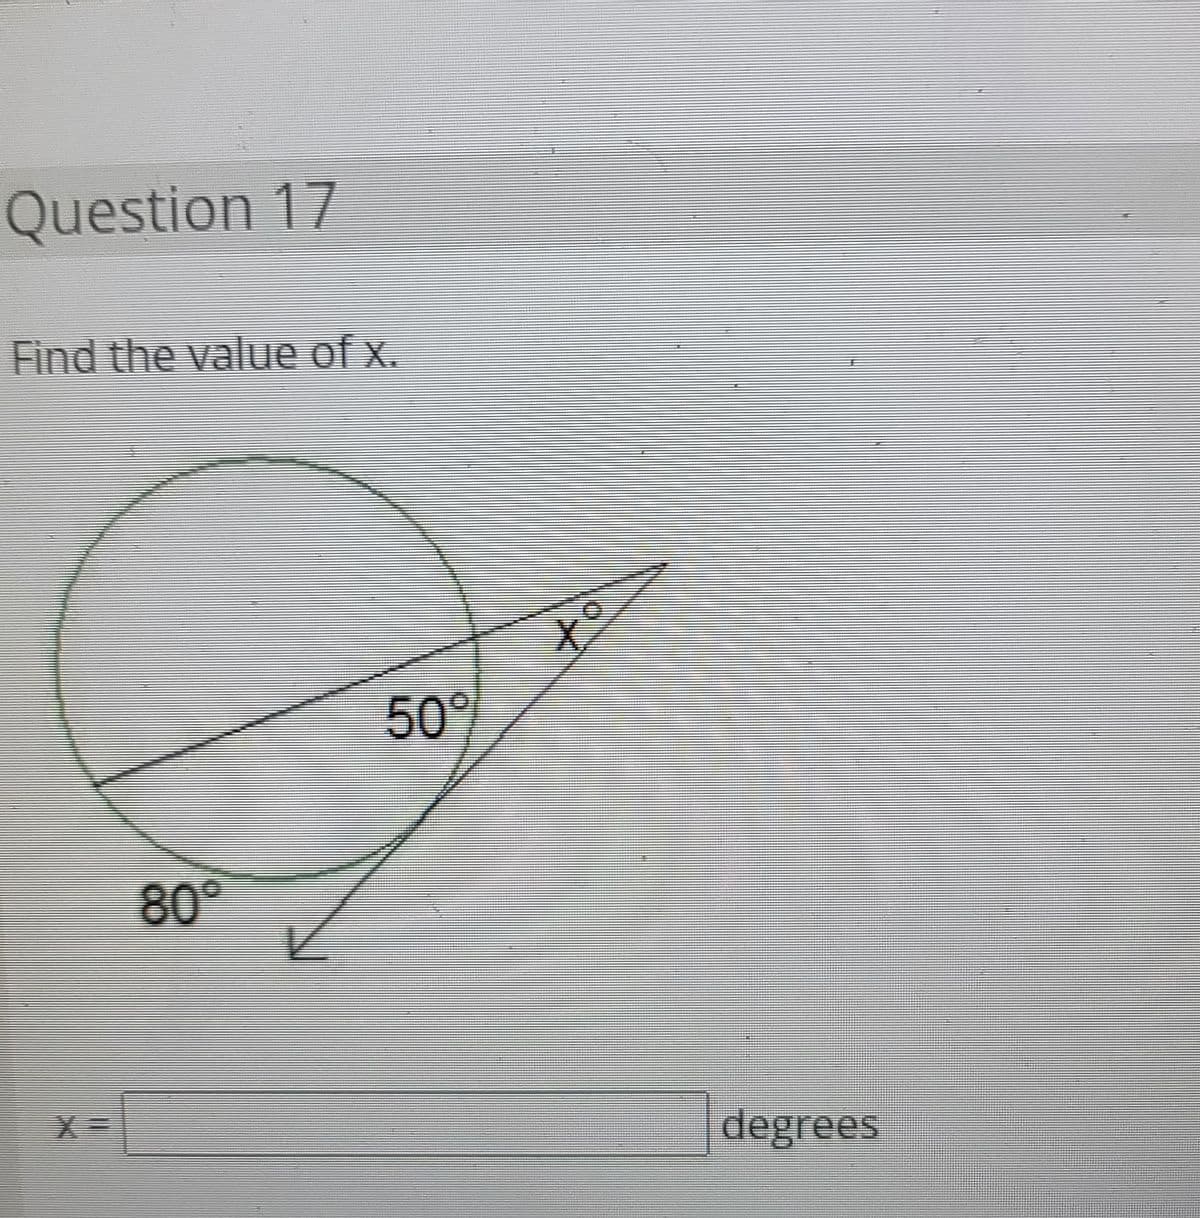 Question 17
Find the value of x.
50°
80°
degrees
